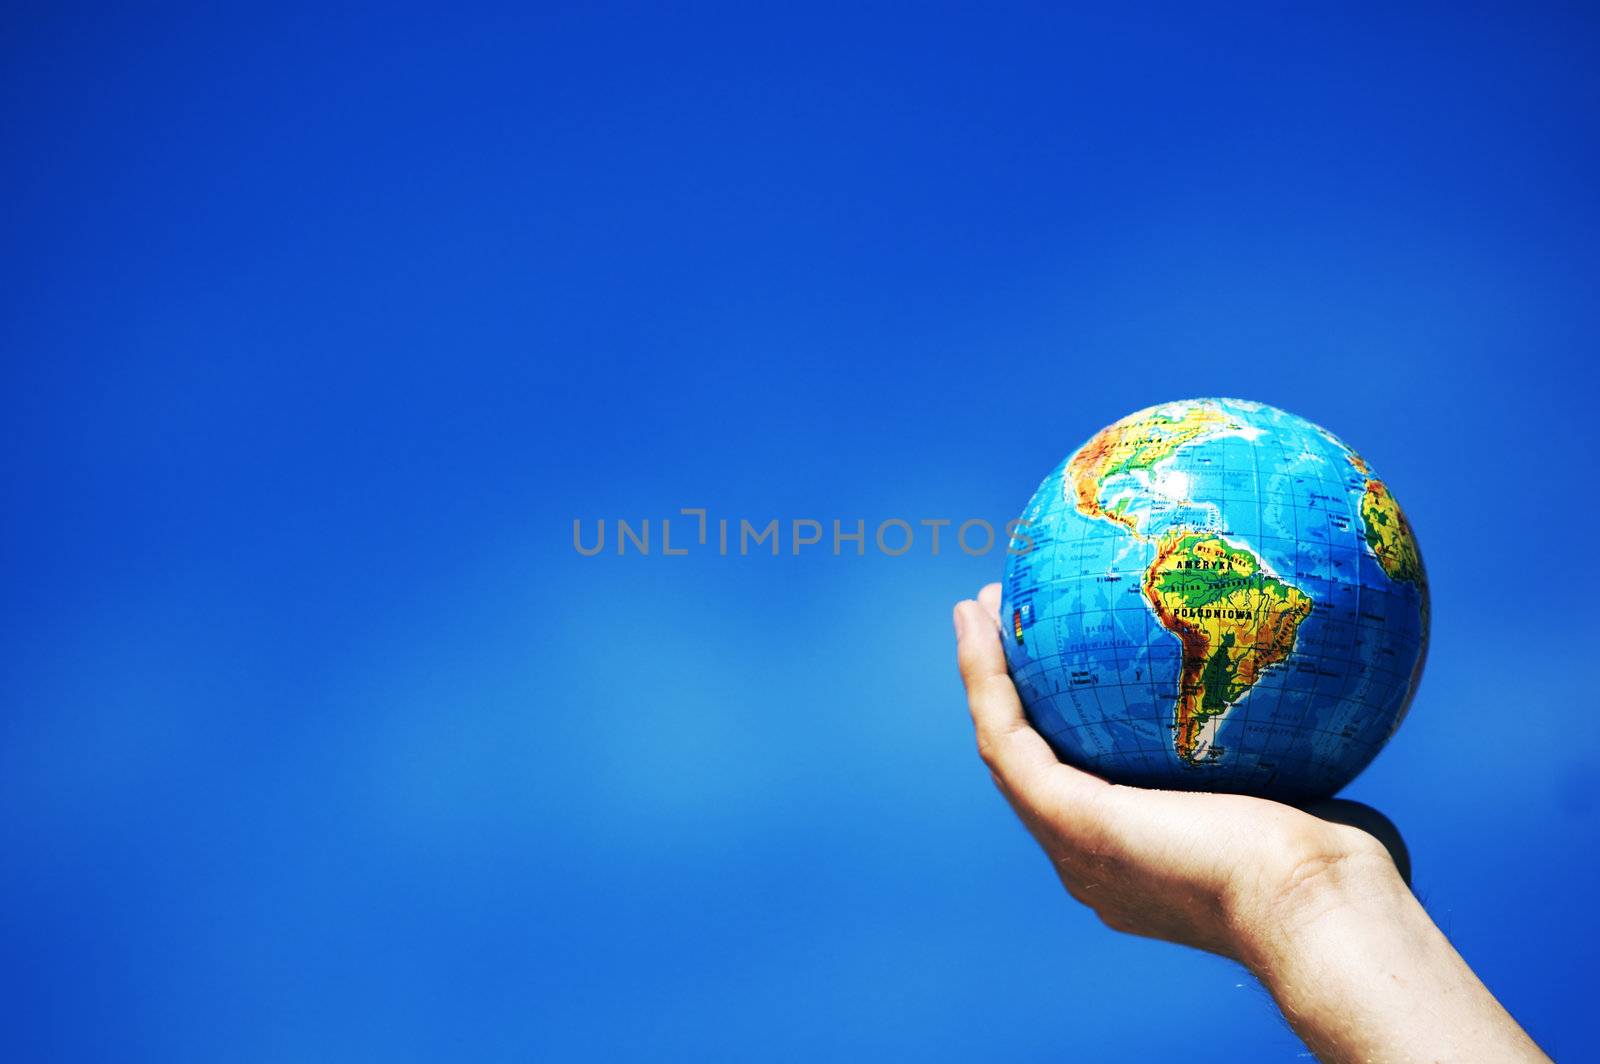 Earth globe in hand protected. Ideal for Earth protection concepts, recycling, world issues, enviroment themes